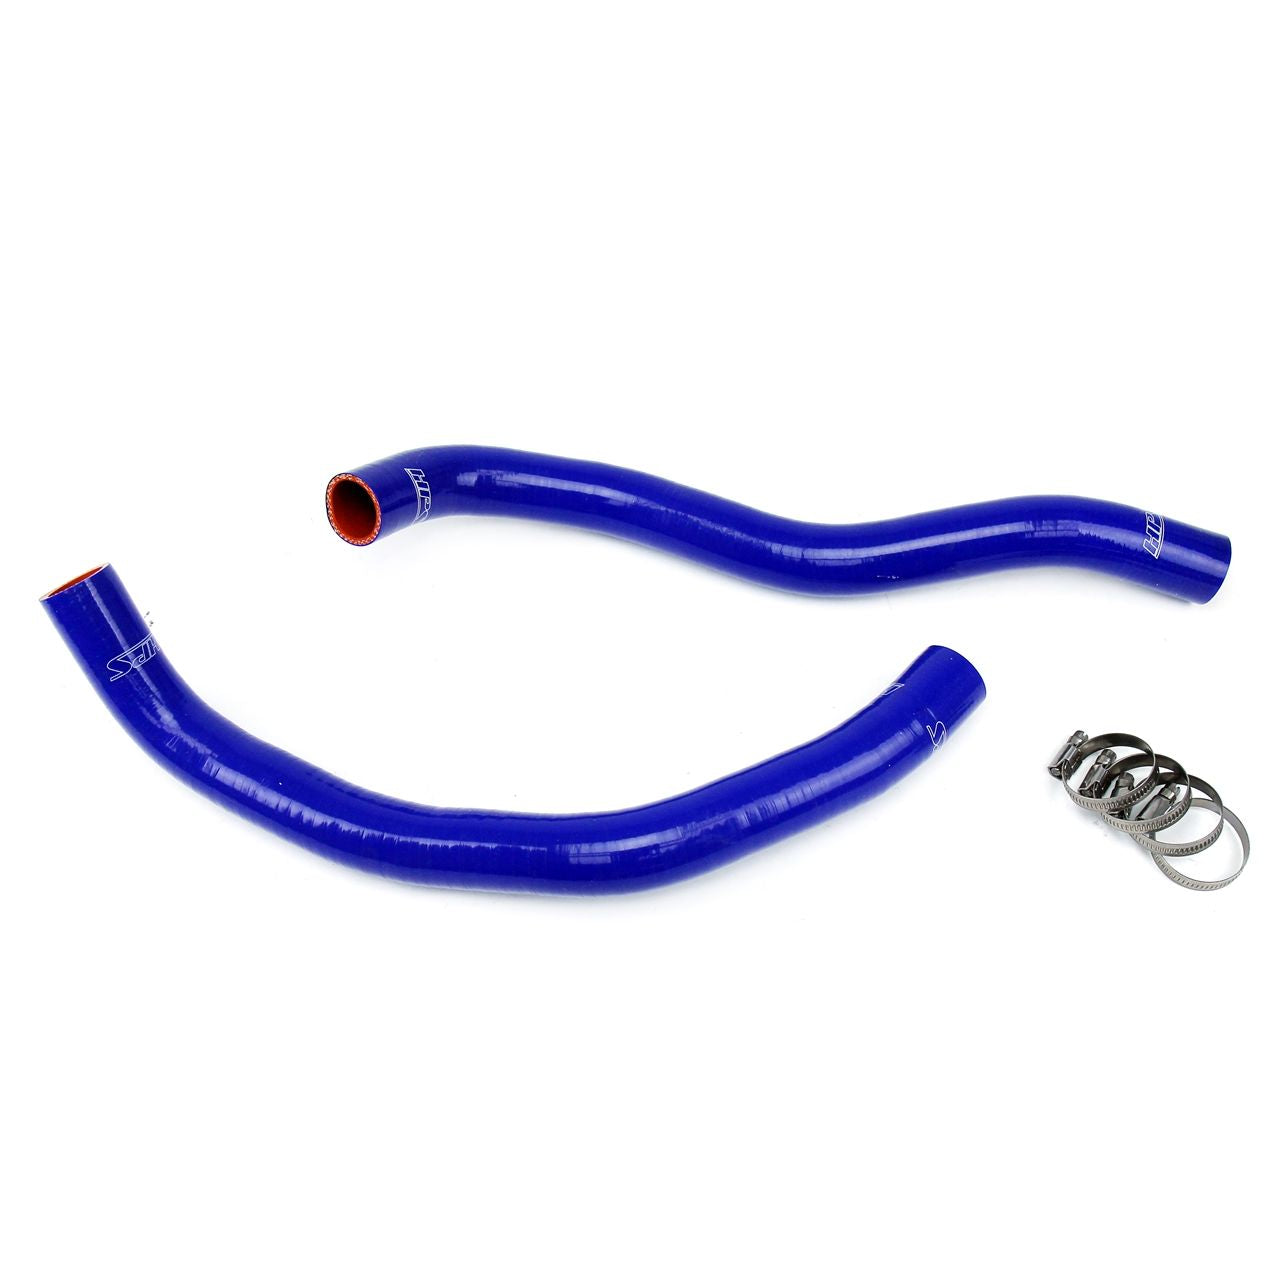 HPS Blue Reinforced Silicone Radiator Hose Kit Coolant for Honda 03-07 Accord 2.4L 4Cyl